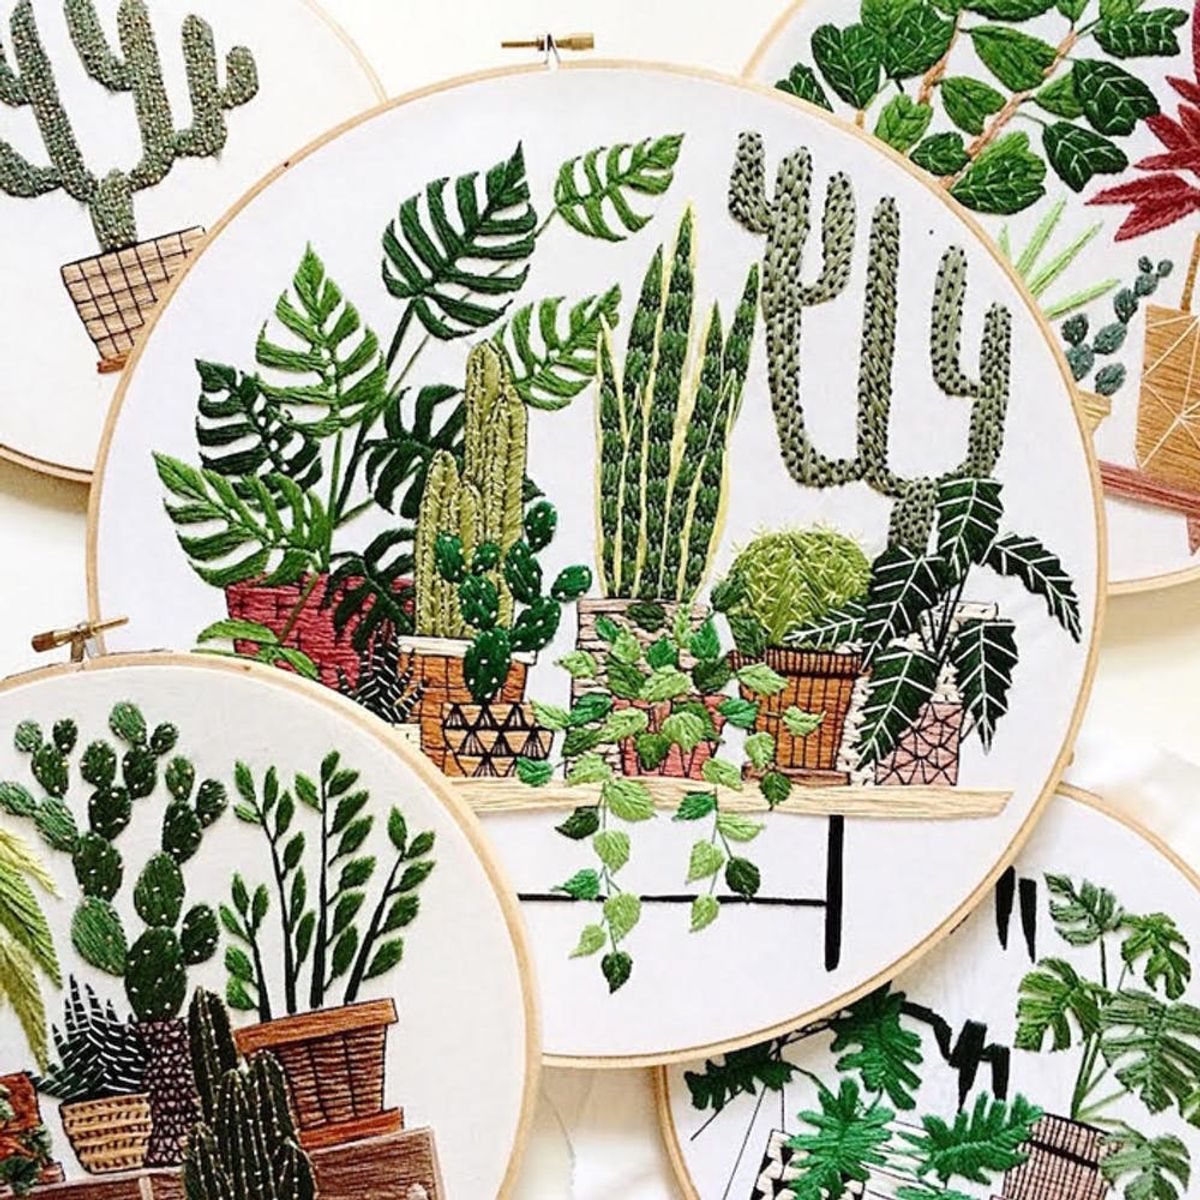 5 Pinterest Garden Trends We’re Definitely Testing Out This Summer